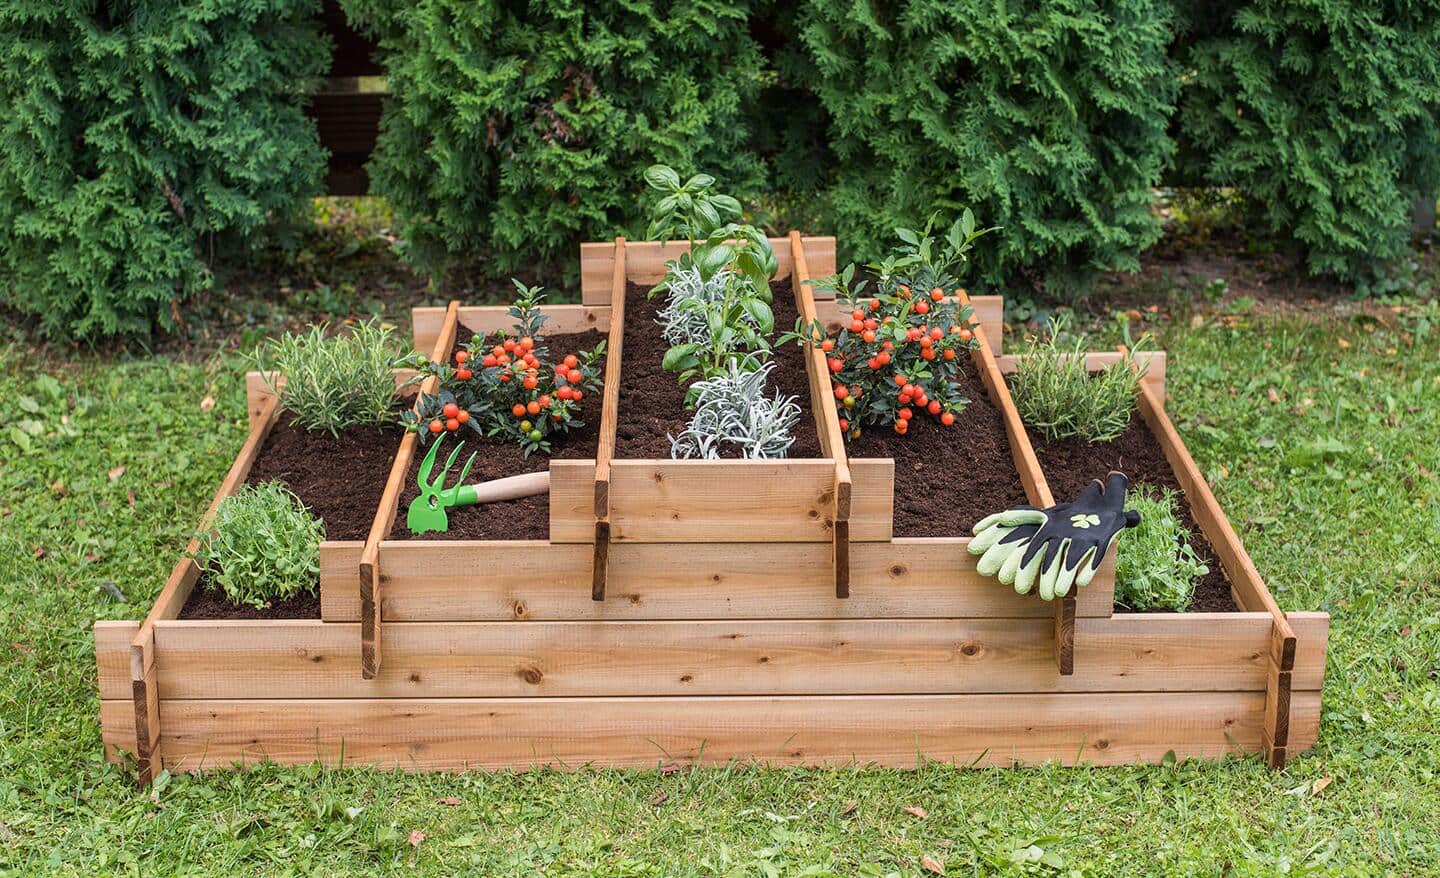 A wooden multi-tiered raised garden bed full of flowers sitting on grass in a yard. 